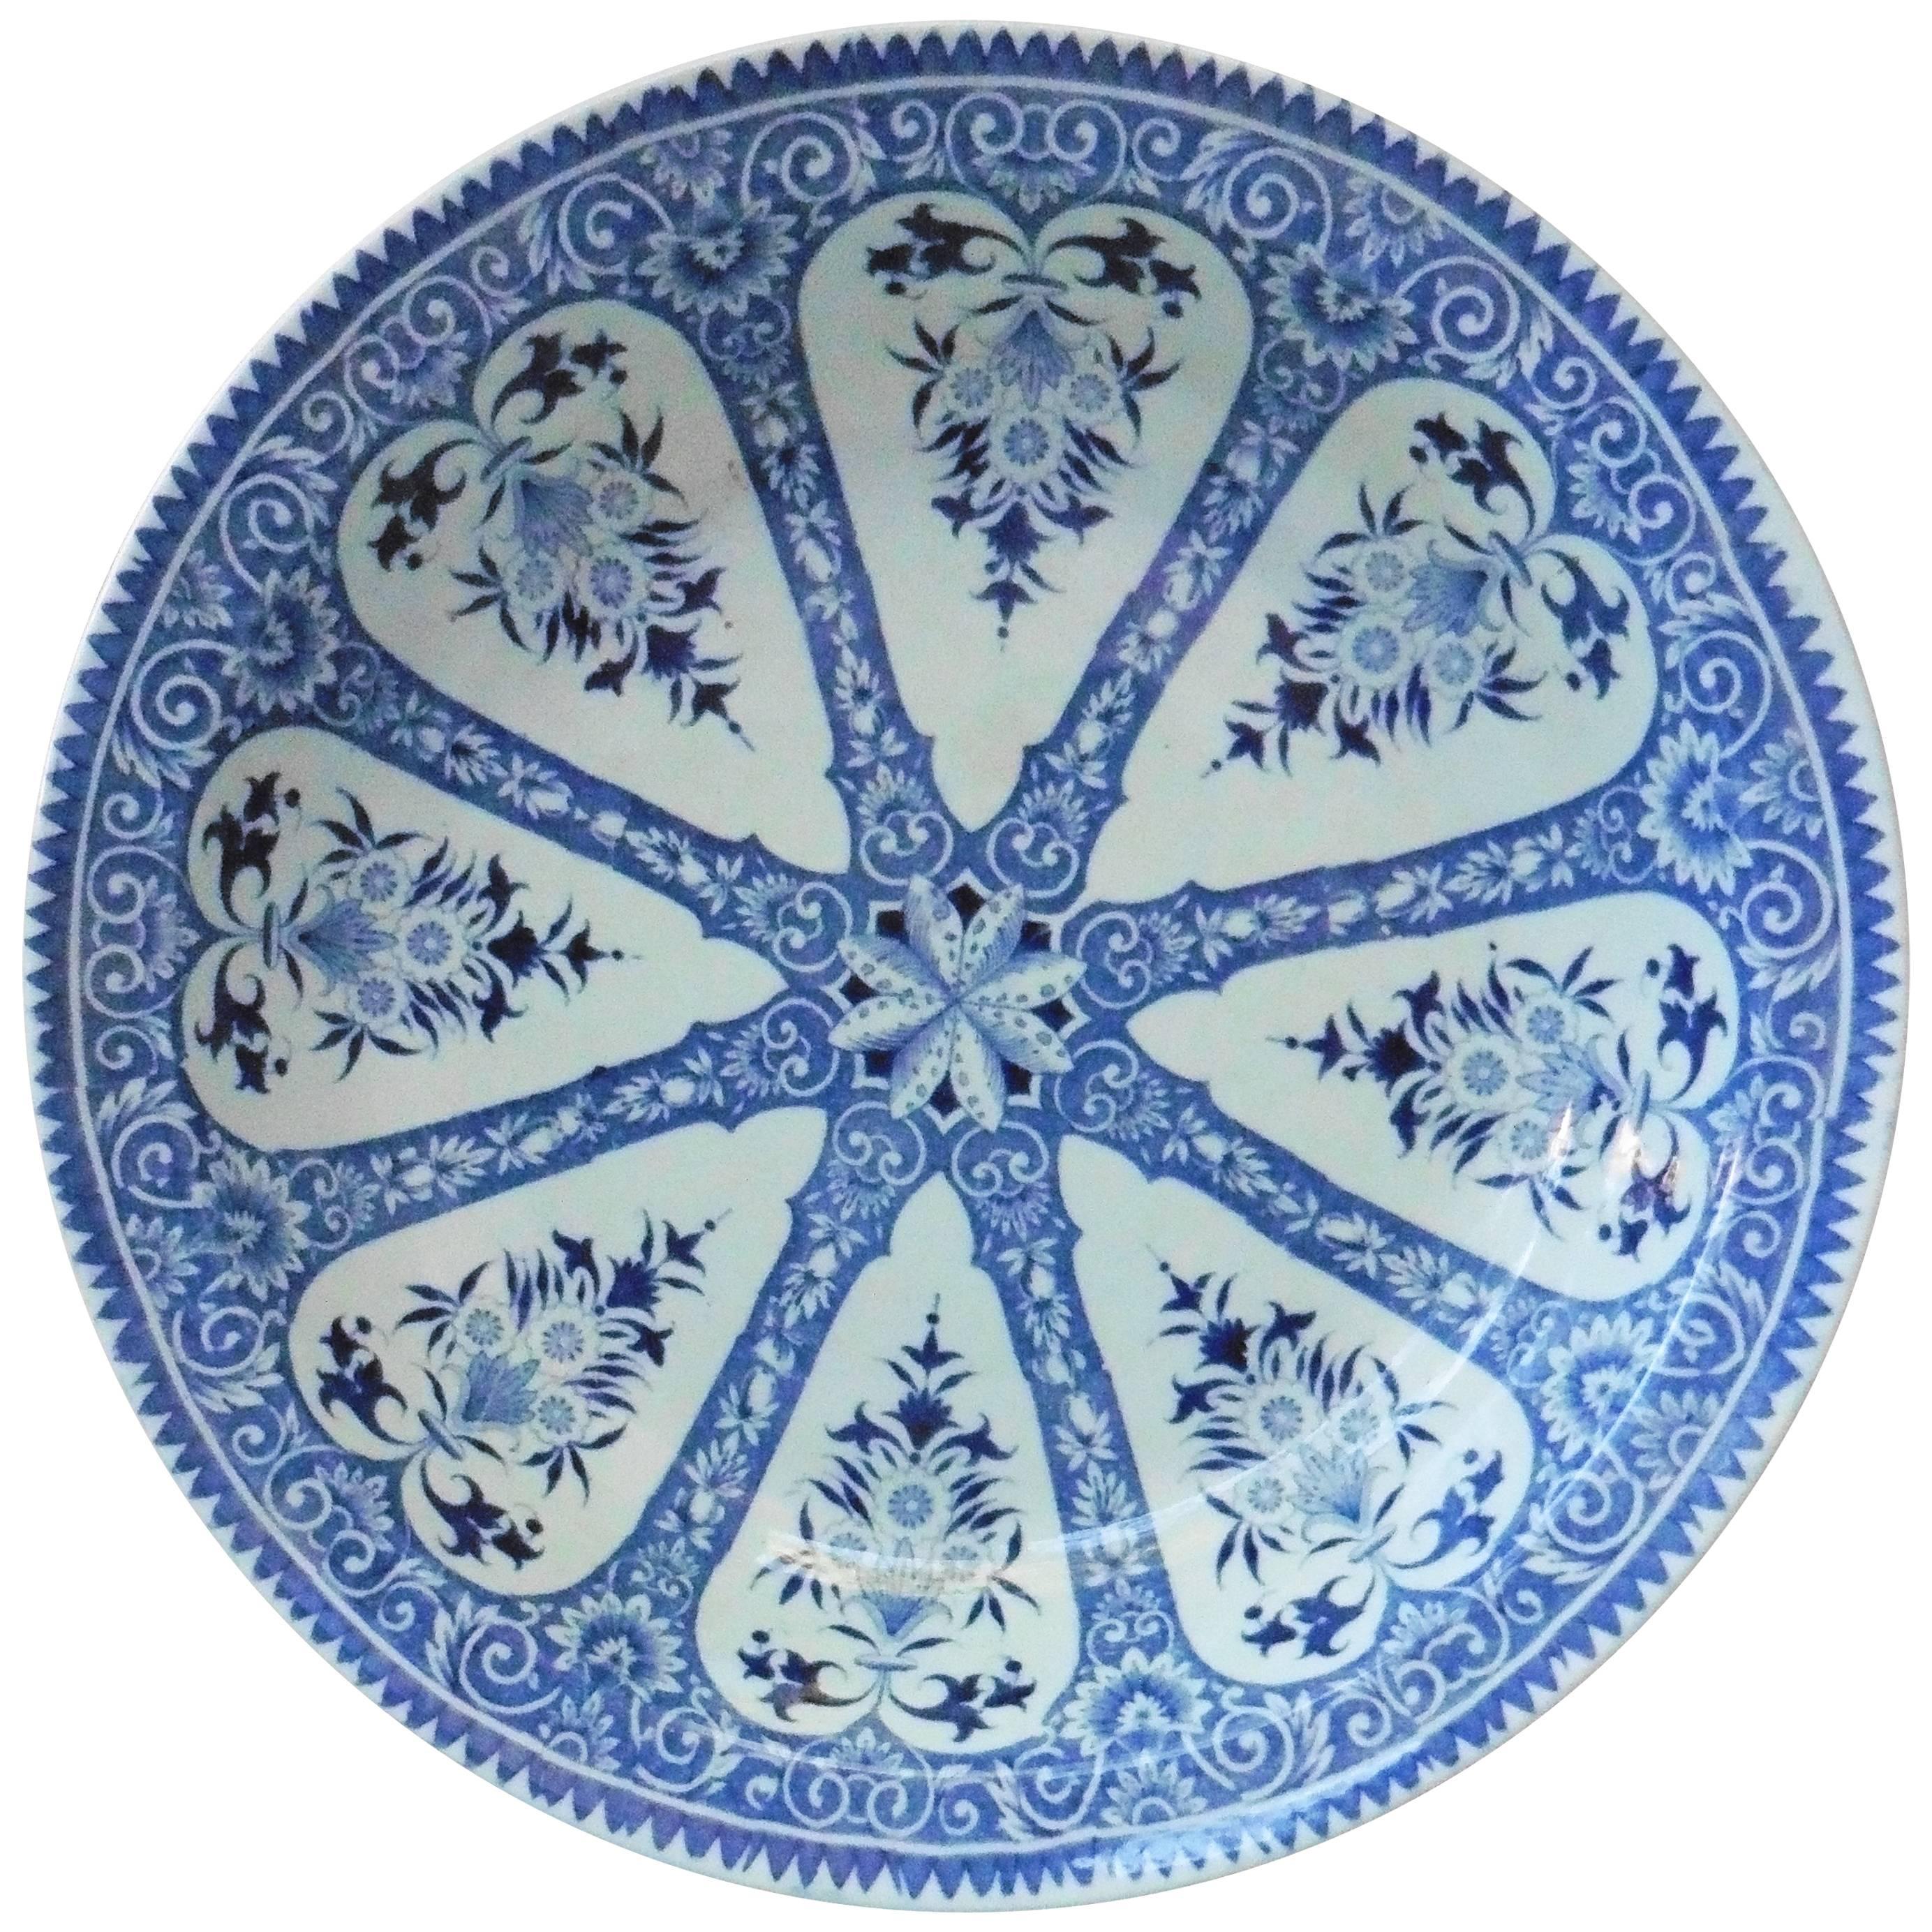 Large French Blue and White Platter Sarreguemines Francois 